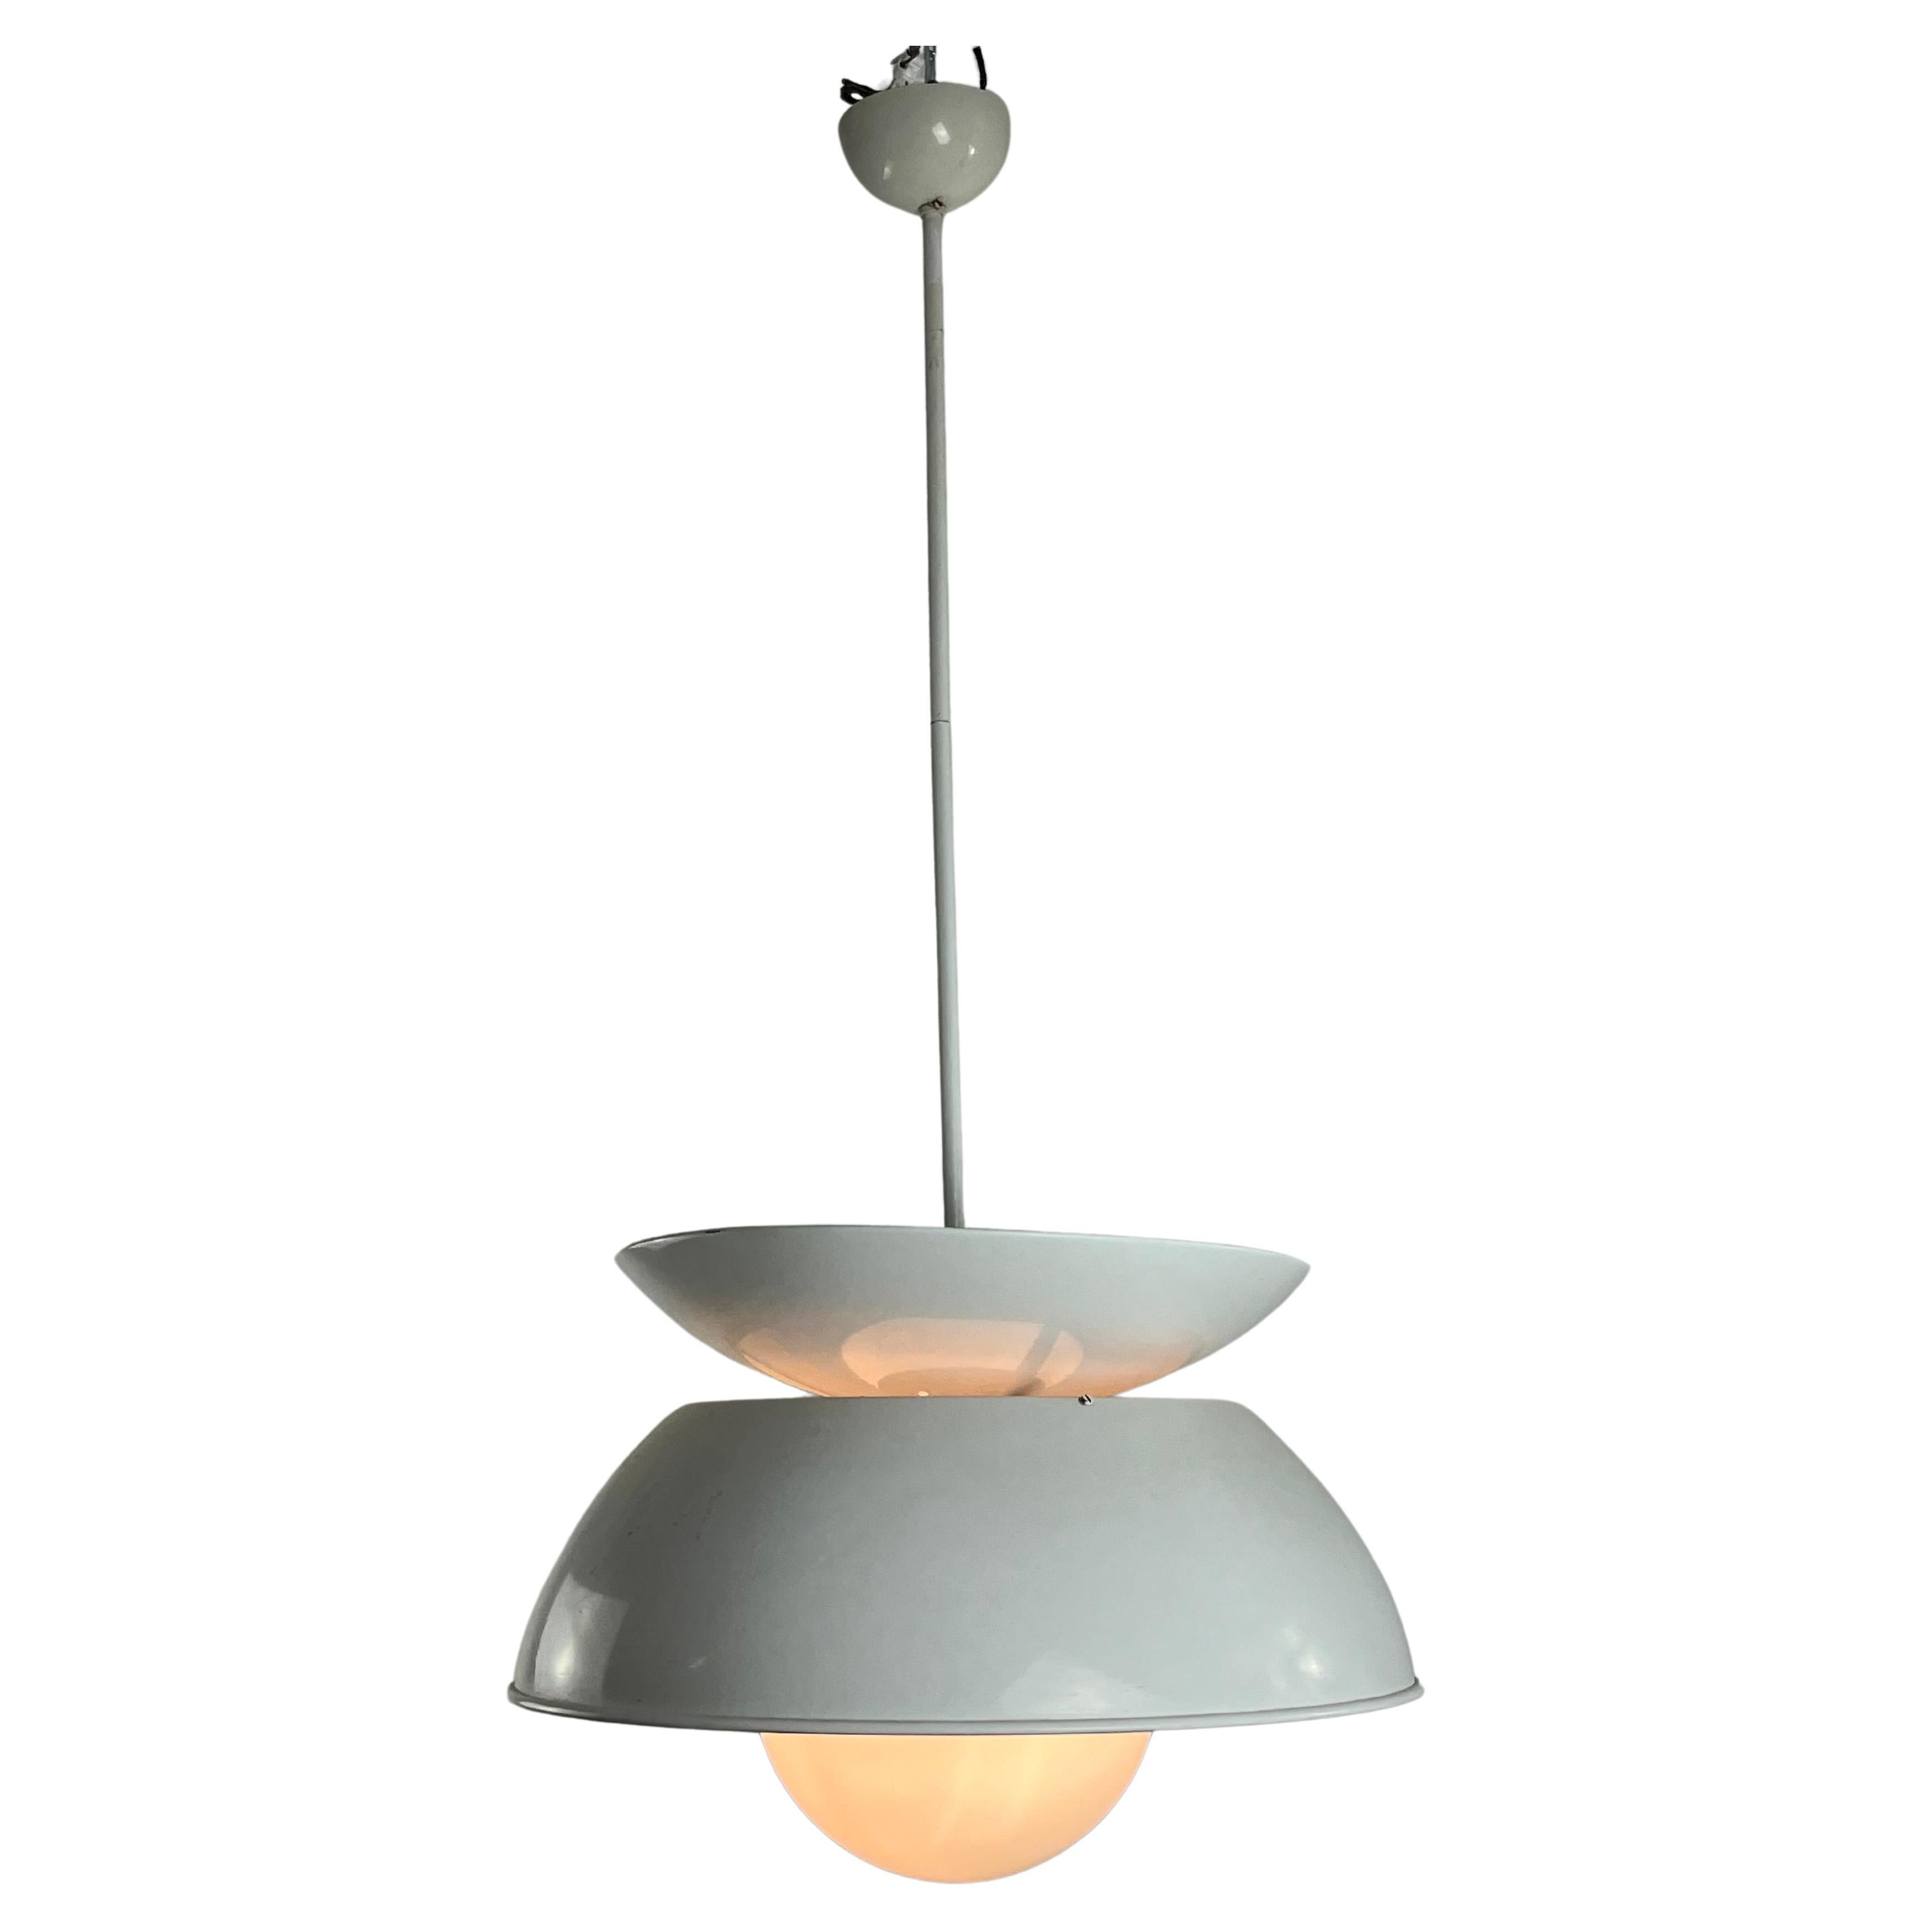 Cetra model chandelier, in white enamelled metal, with lower sphere diffuser in opal glass. In the upper part of the PAC there are three other lamp holders, also in white metal. The upper part with the three bulbs functions as upward lighting, while